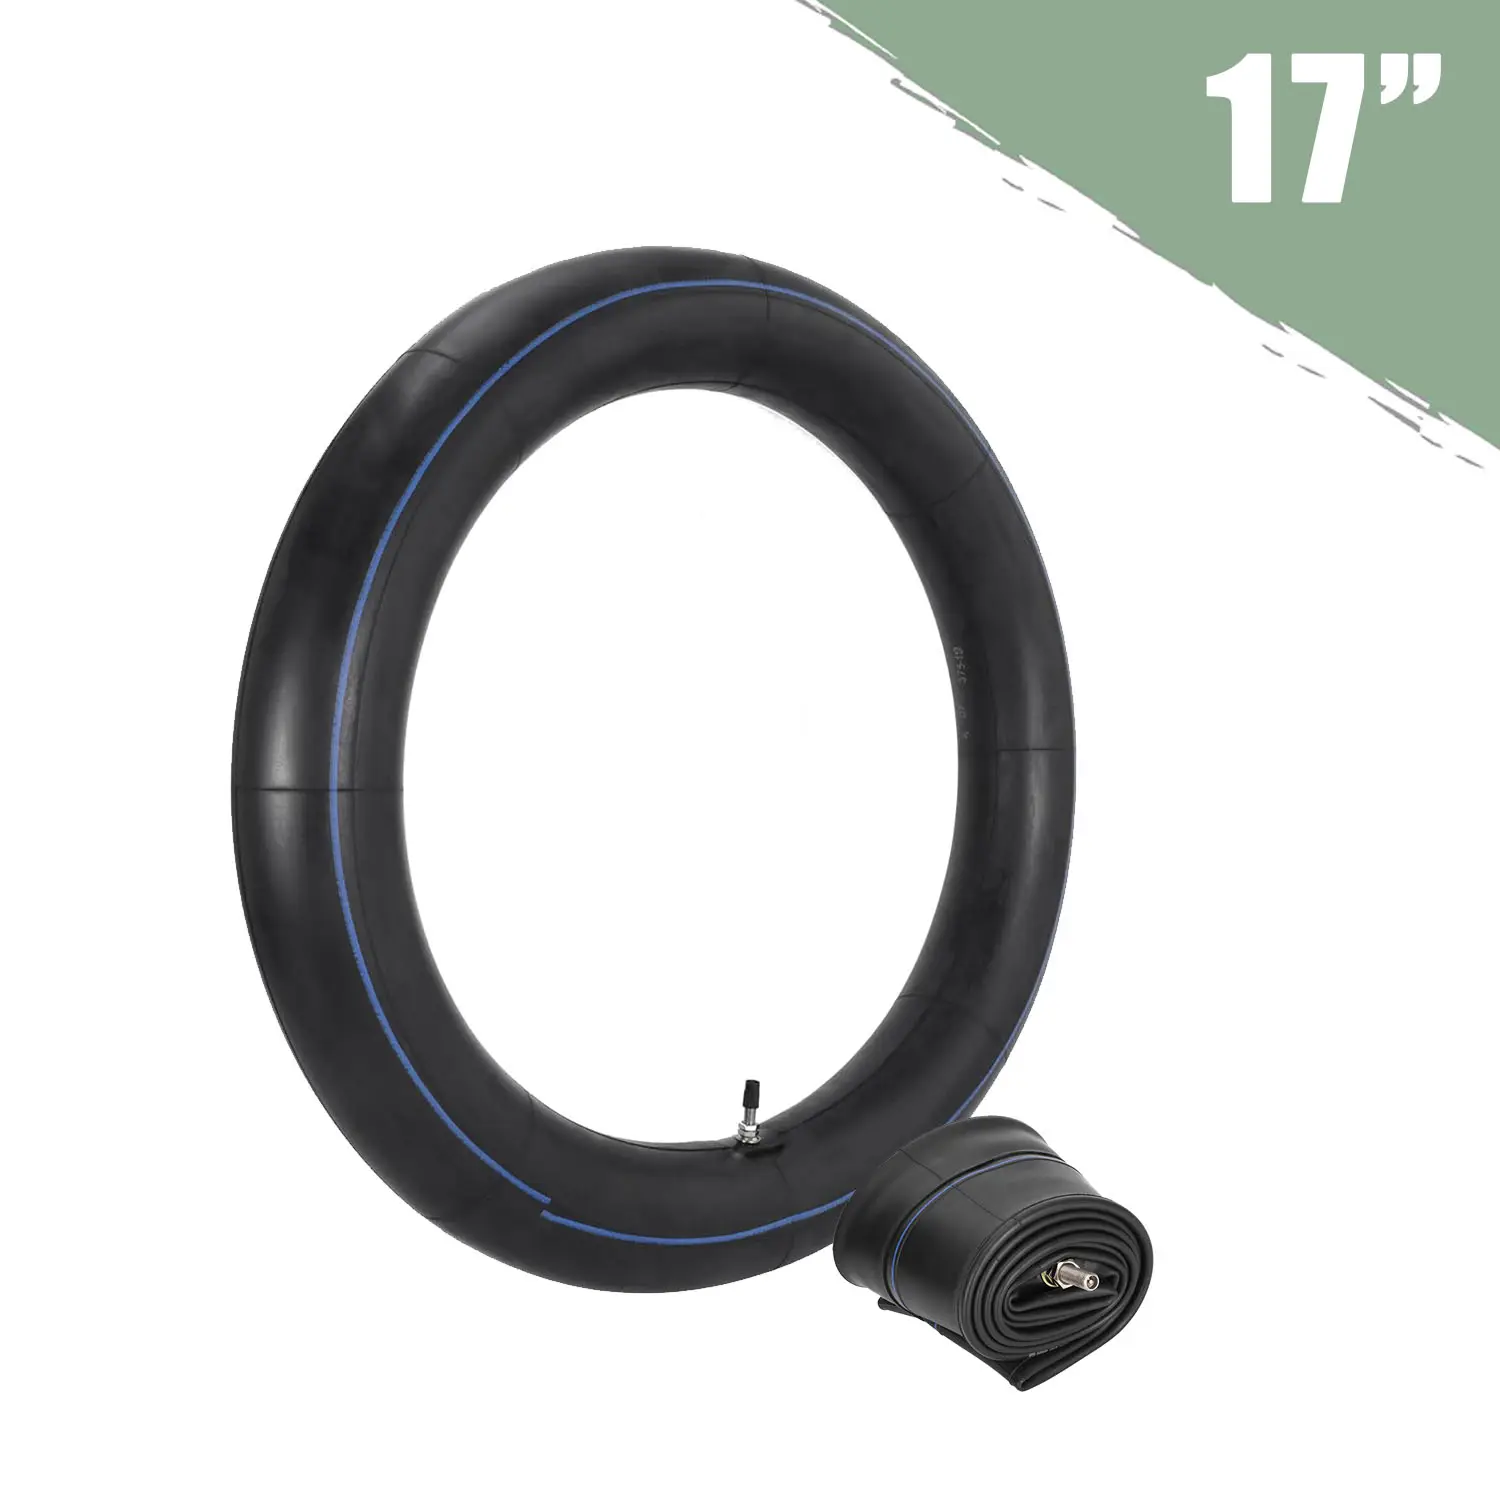 2.50/2.75-17 The natural rubber butyl 70/100-17 Inner Tube with TR4 Straight Valve Stem for 17 inch Off Road Motorcycle